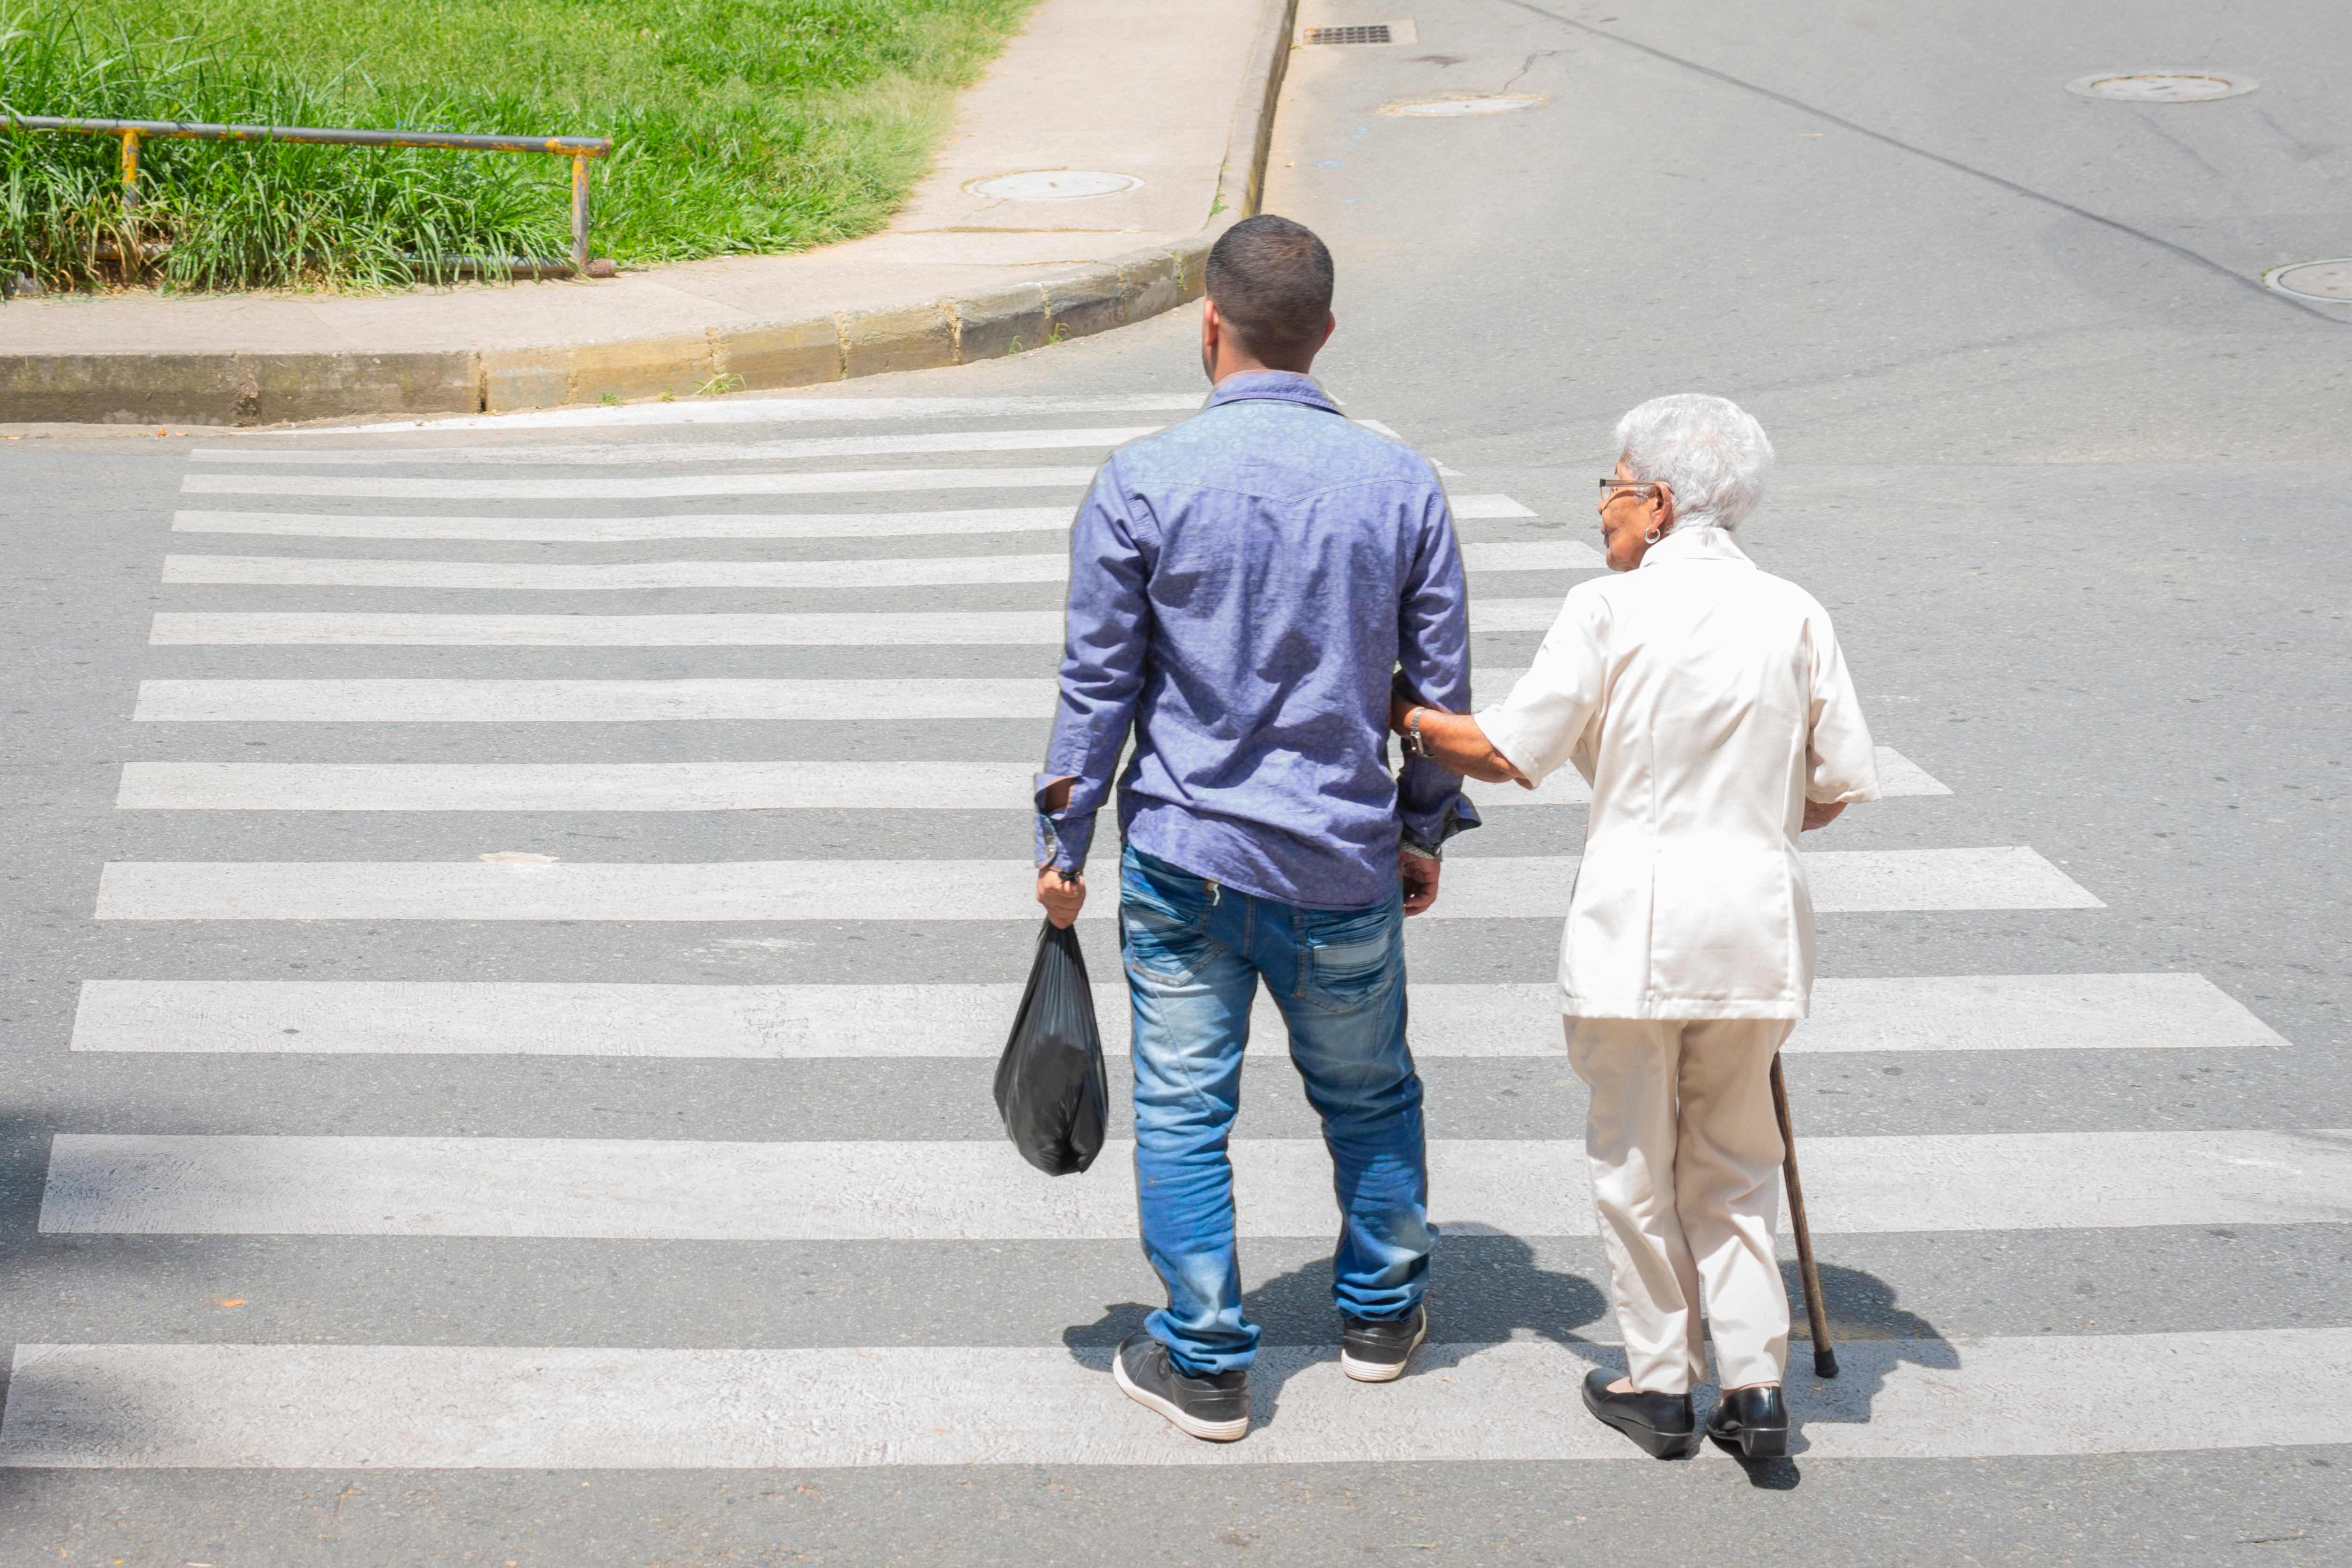 A man and an old woman crossing the street | Source: Shutterstock